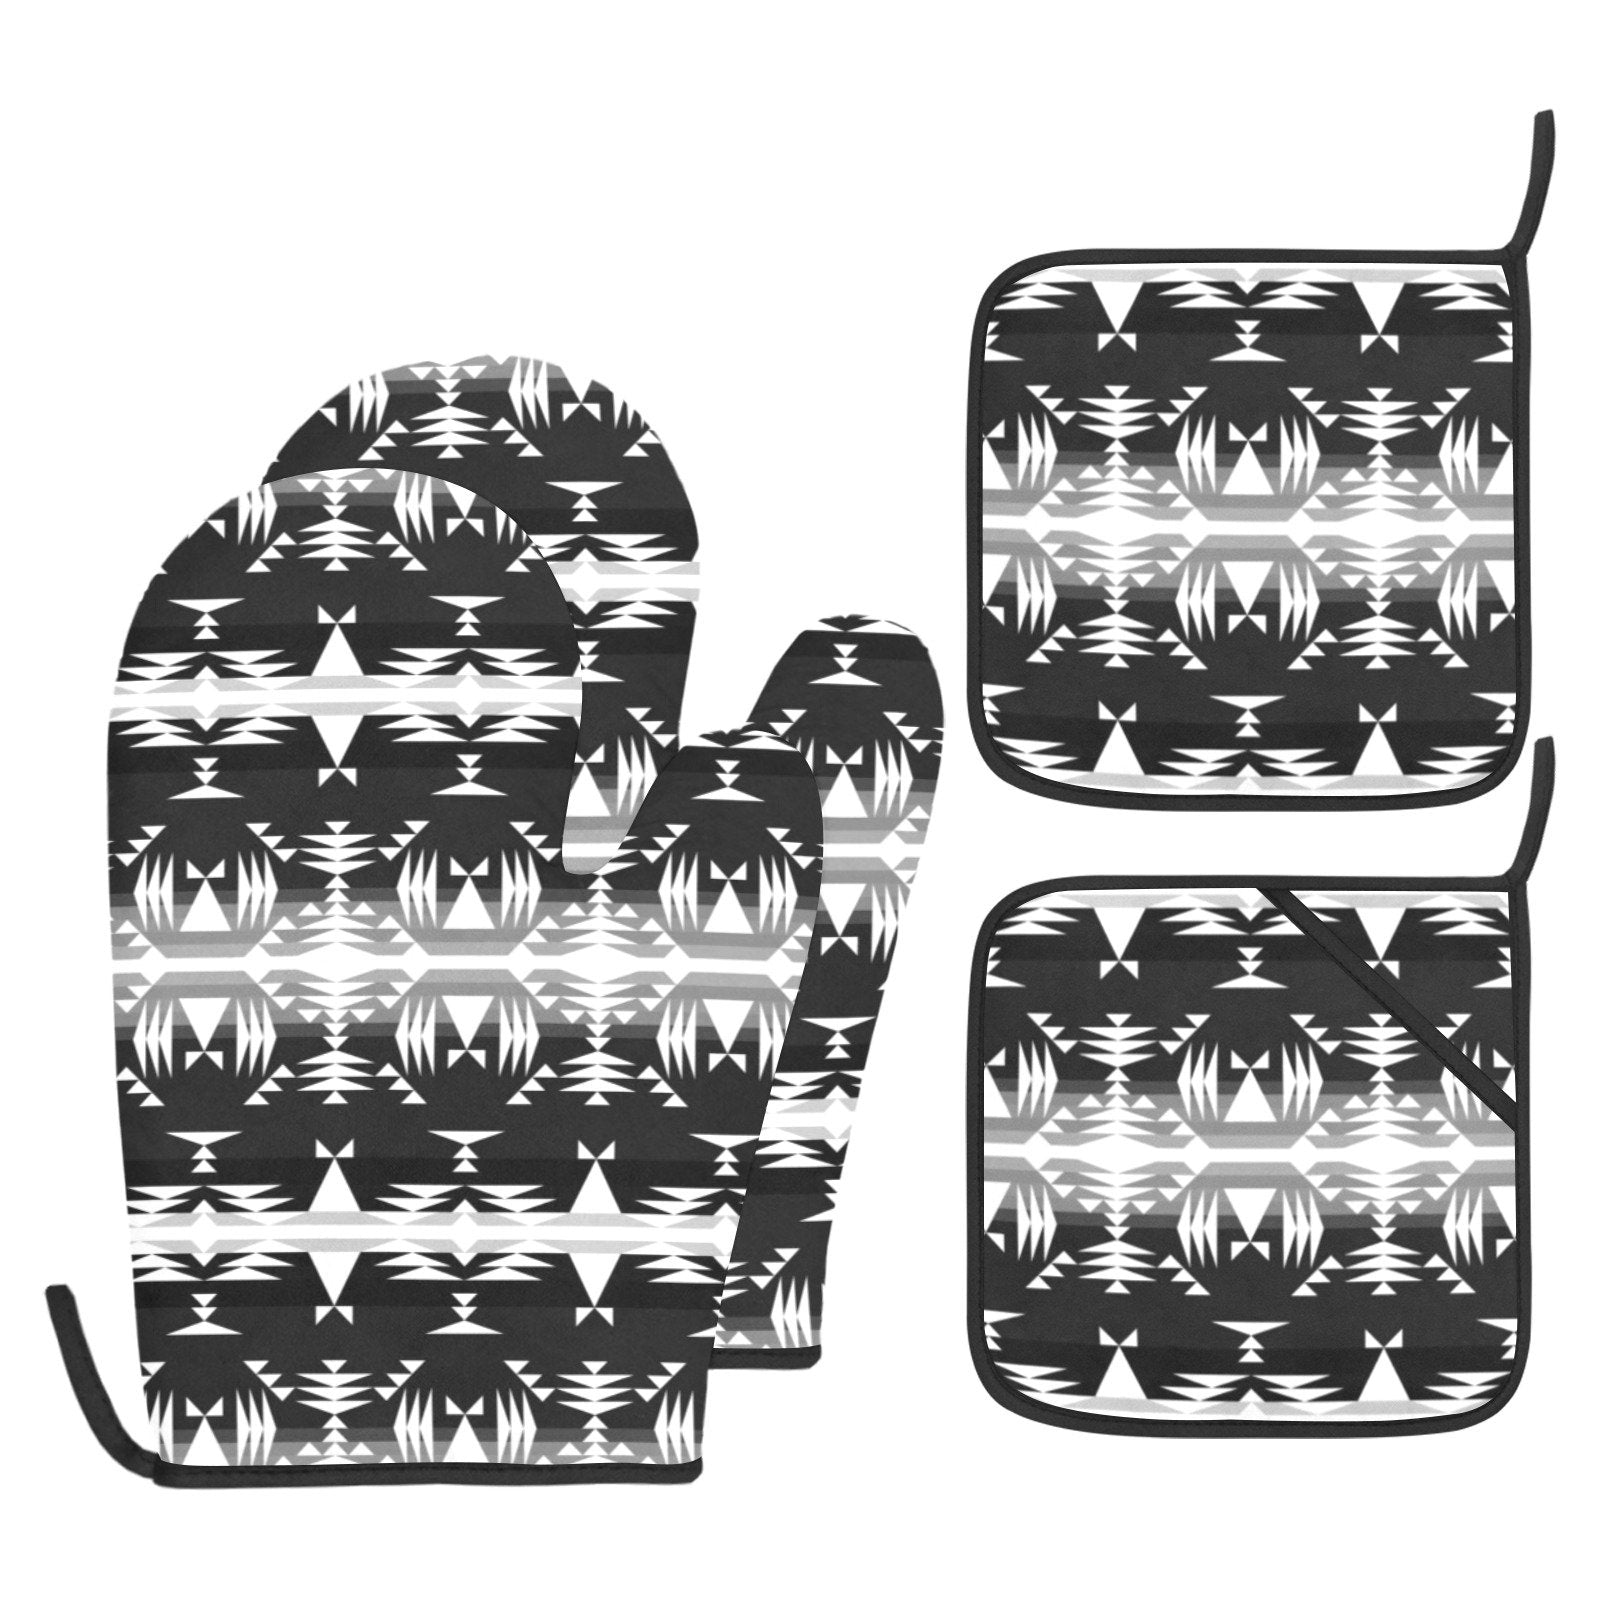 Between the Mountains Black and White Oven Mitt & Pot Holder Oven Mitt & Pot Holder e-joyer 